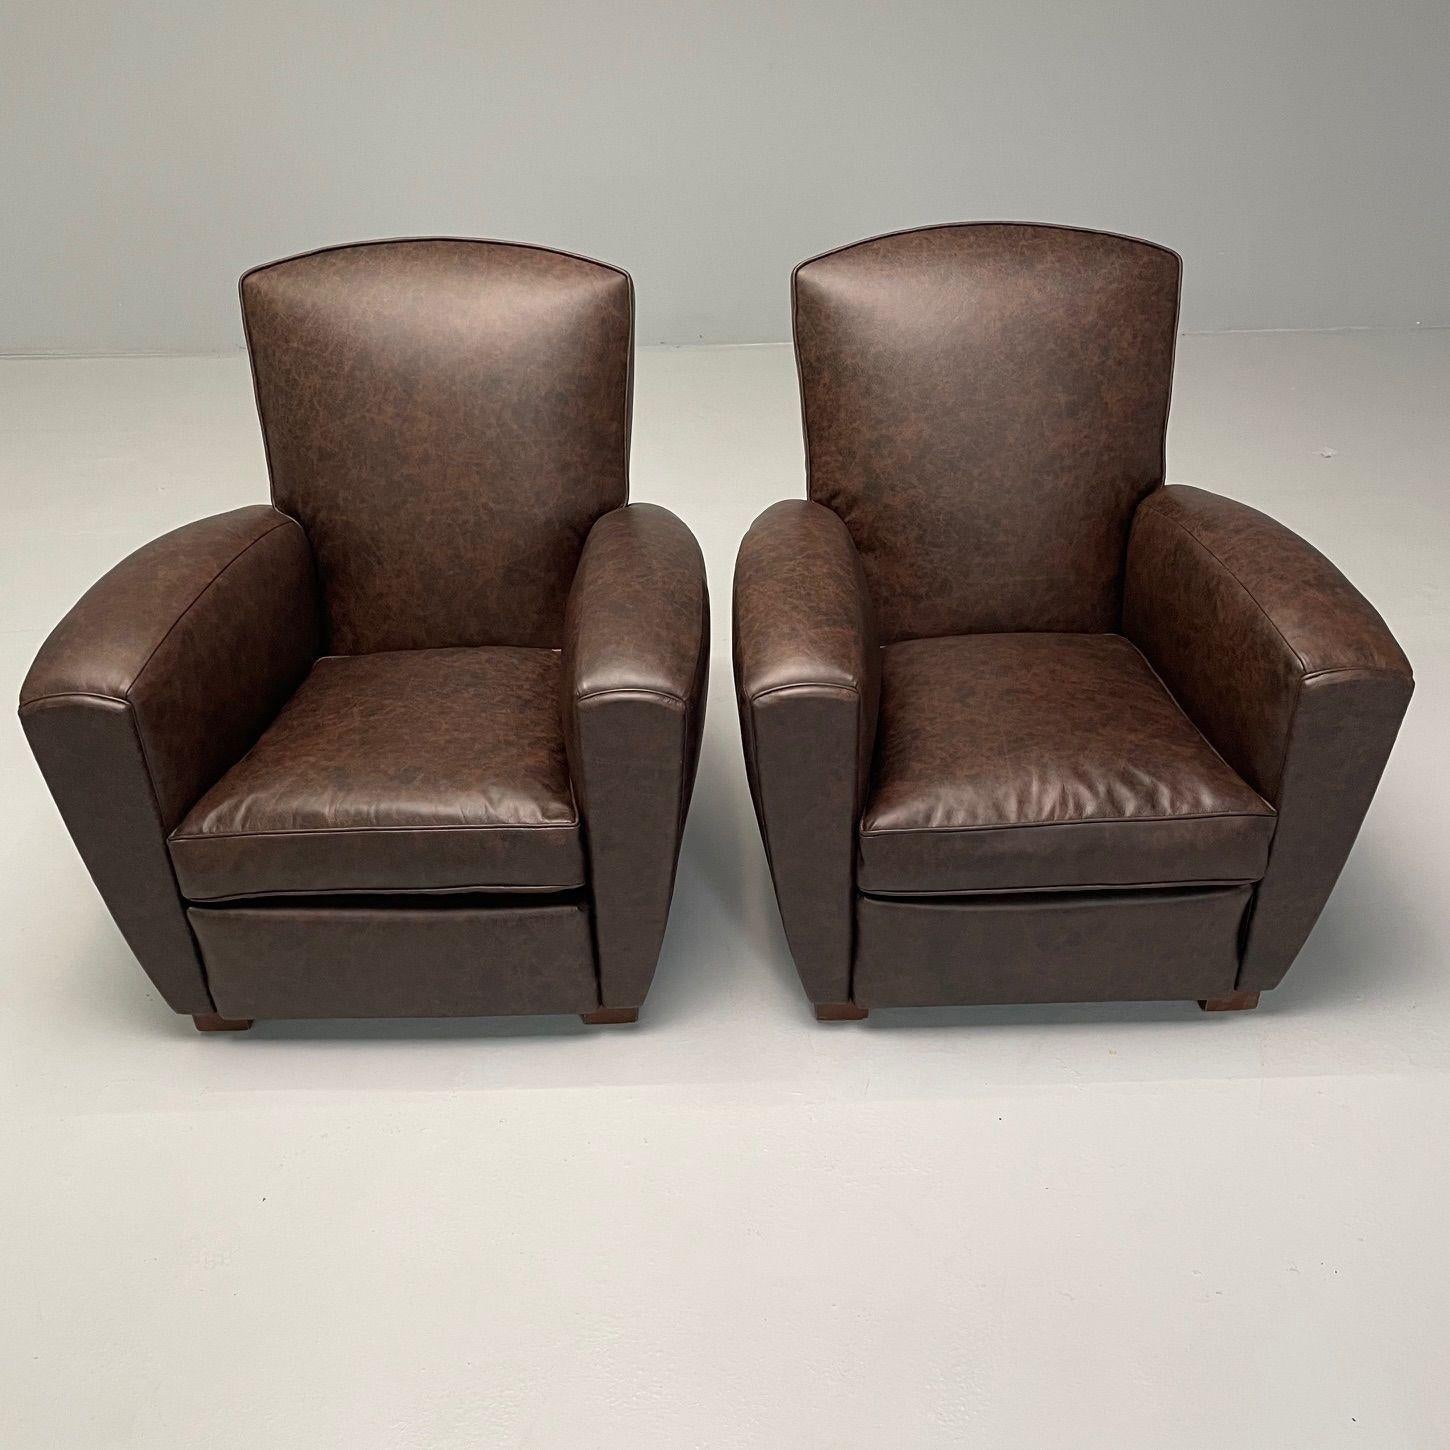 Jacques Adnet Style, French Art Deco Club Chairs, Distressed Leather, Oak, 1930s

Quality pair of leather art deco chairs designed and produced in France circa 1930/40s. These chairs have been newly upholstered in a distressed brown leather. They